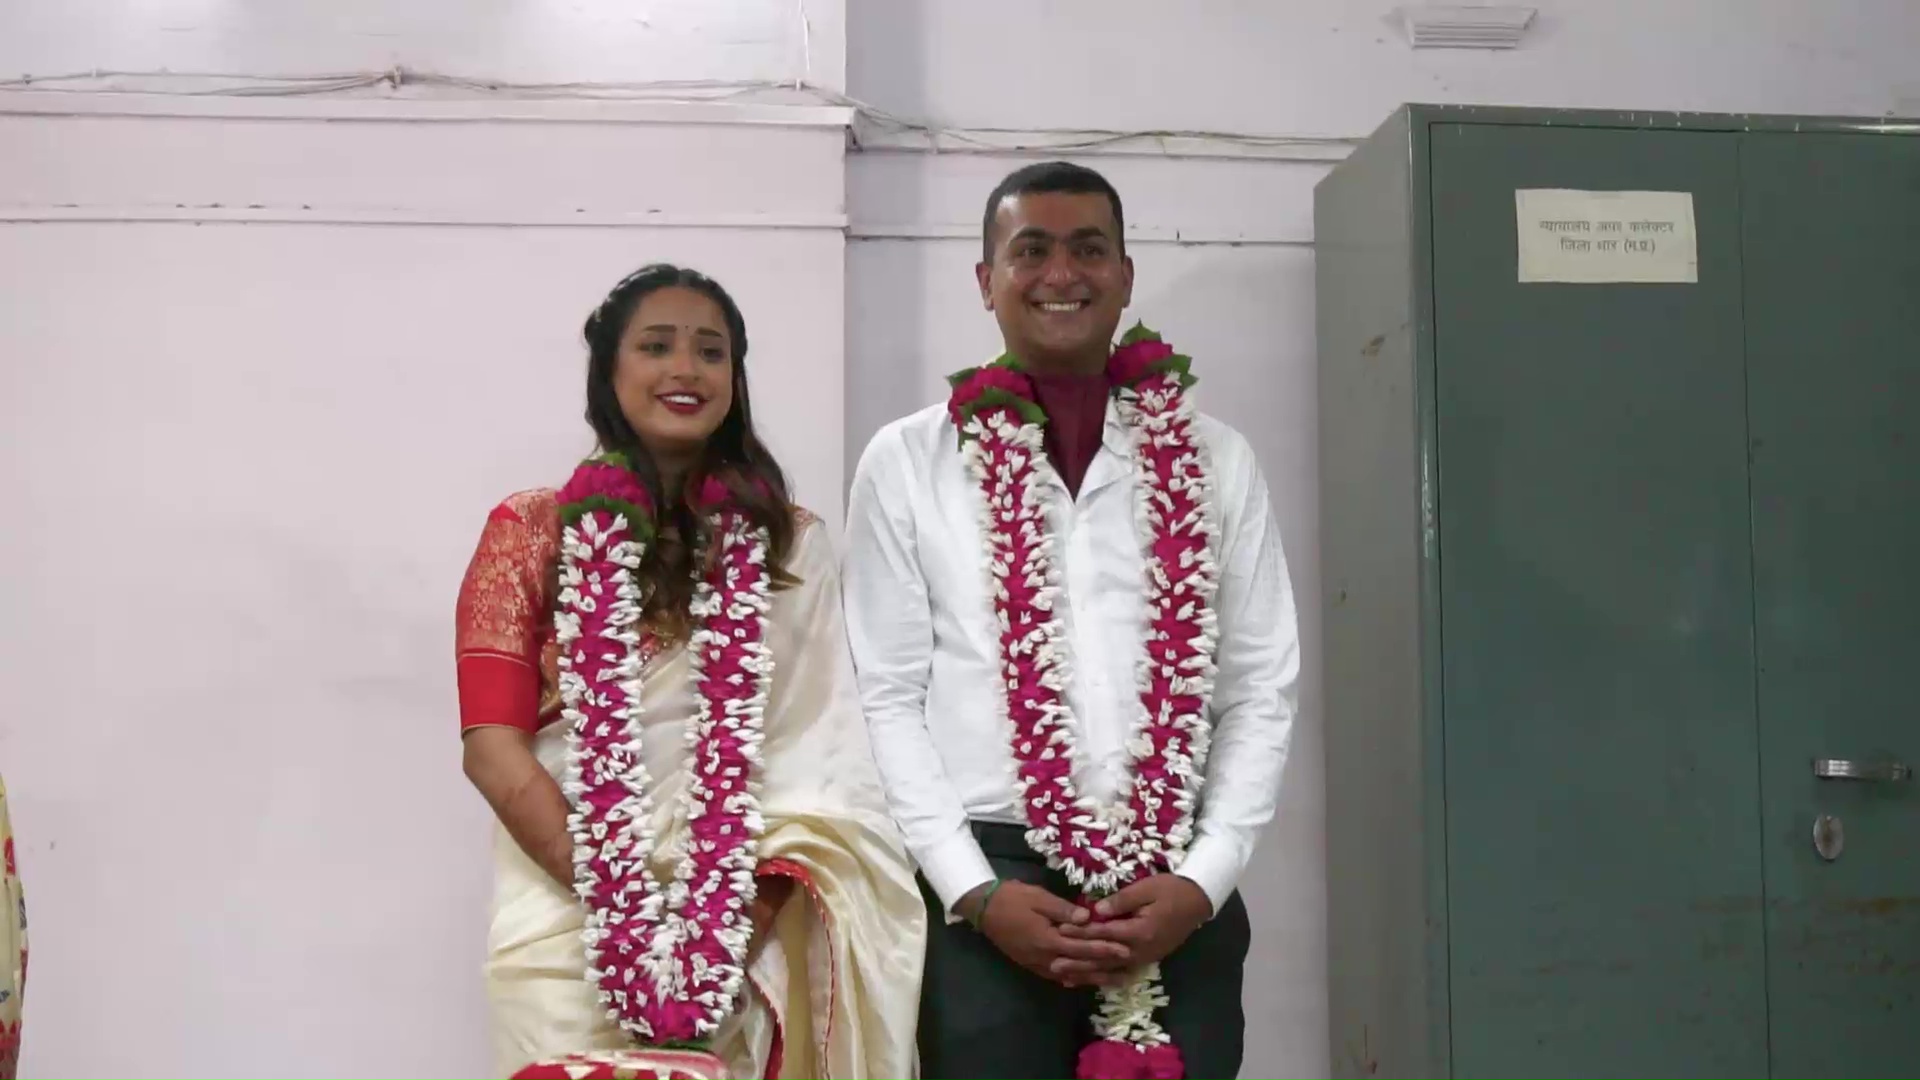 amazing-wedding-in-dhar-city-magistrate-and-army-major-got-married-by-spending-only-500-rupees